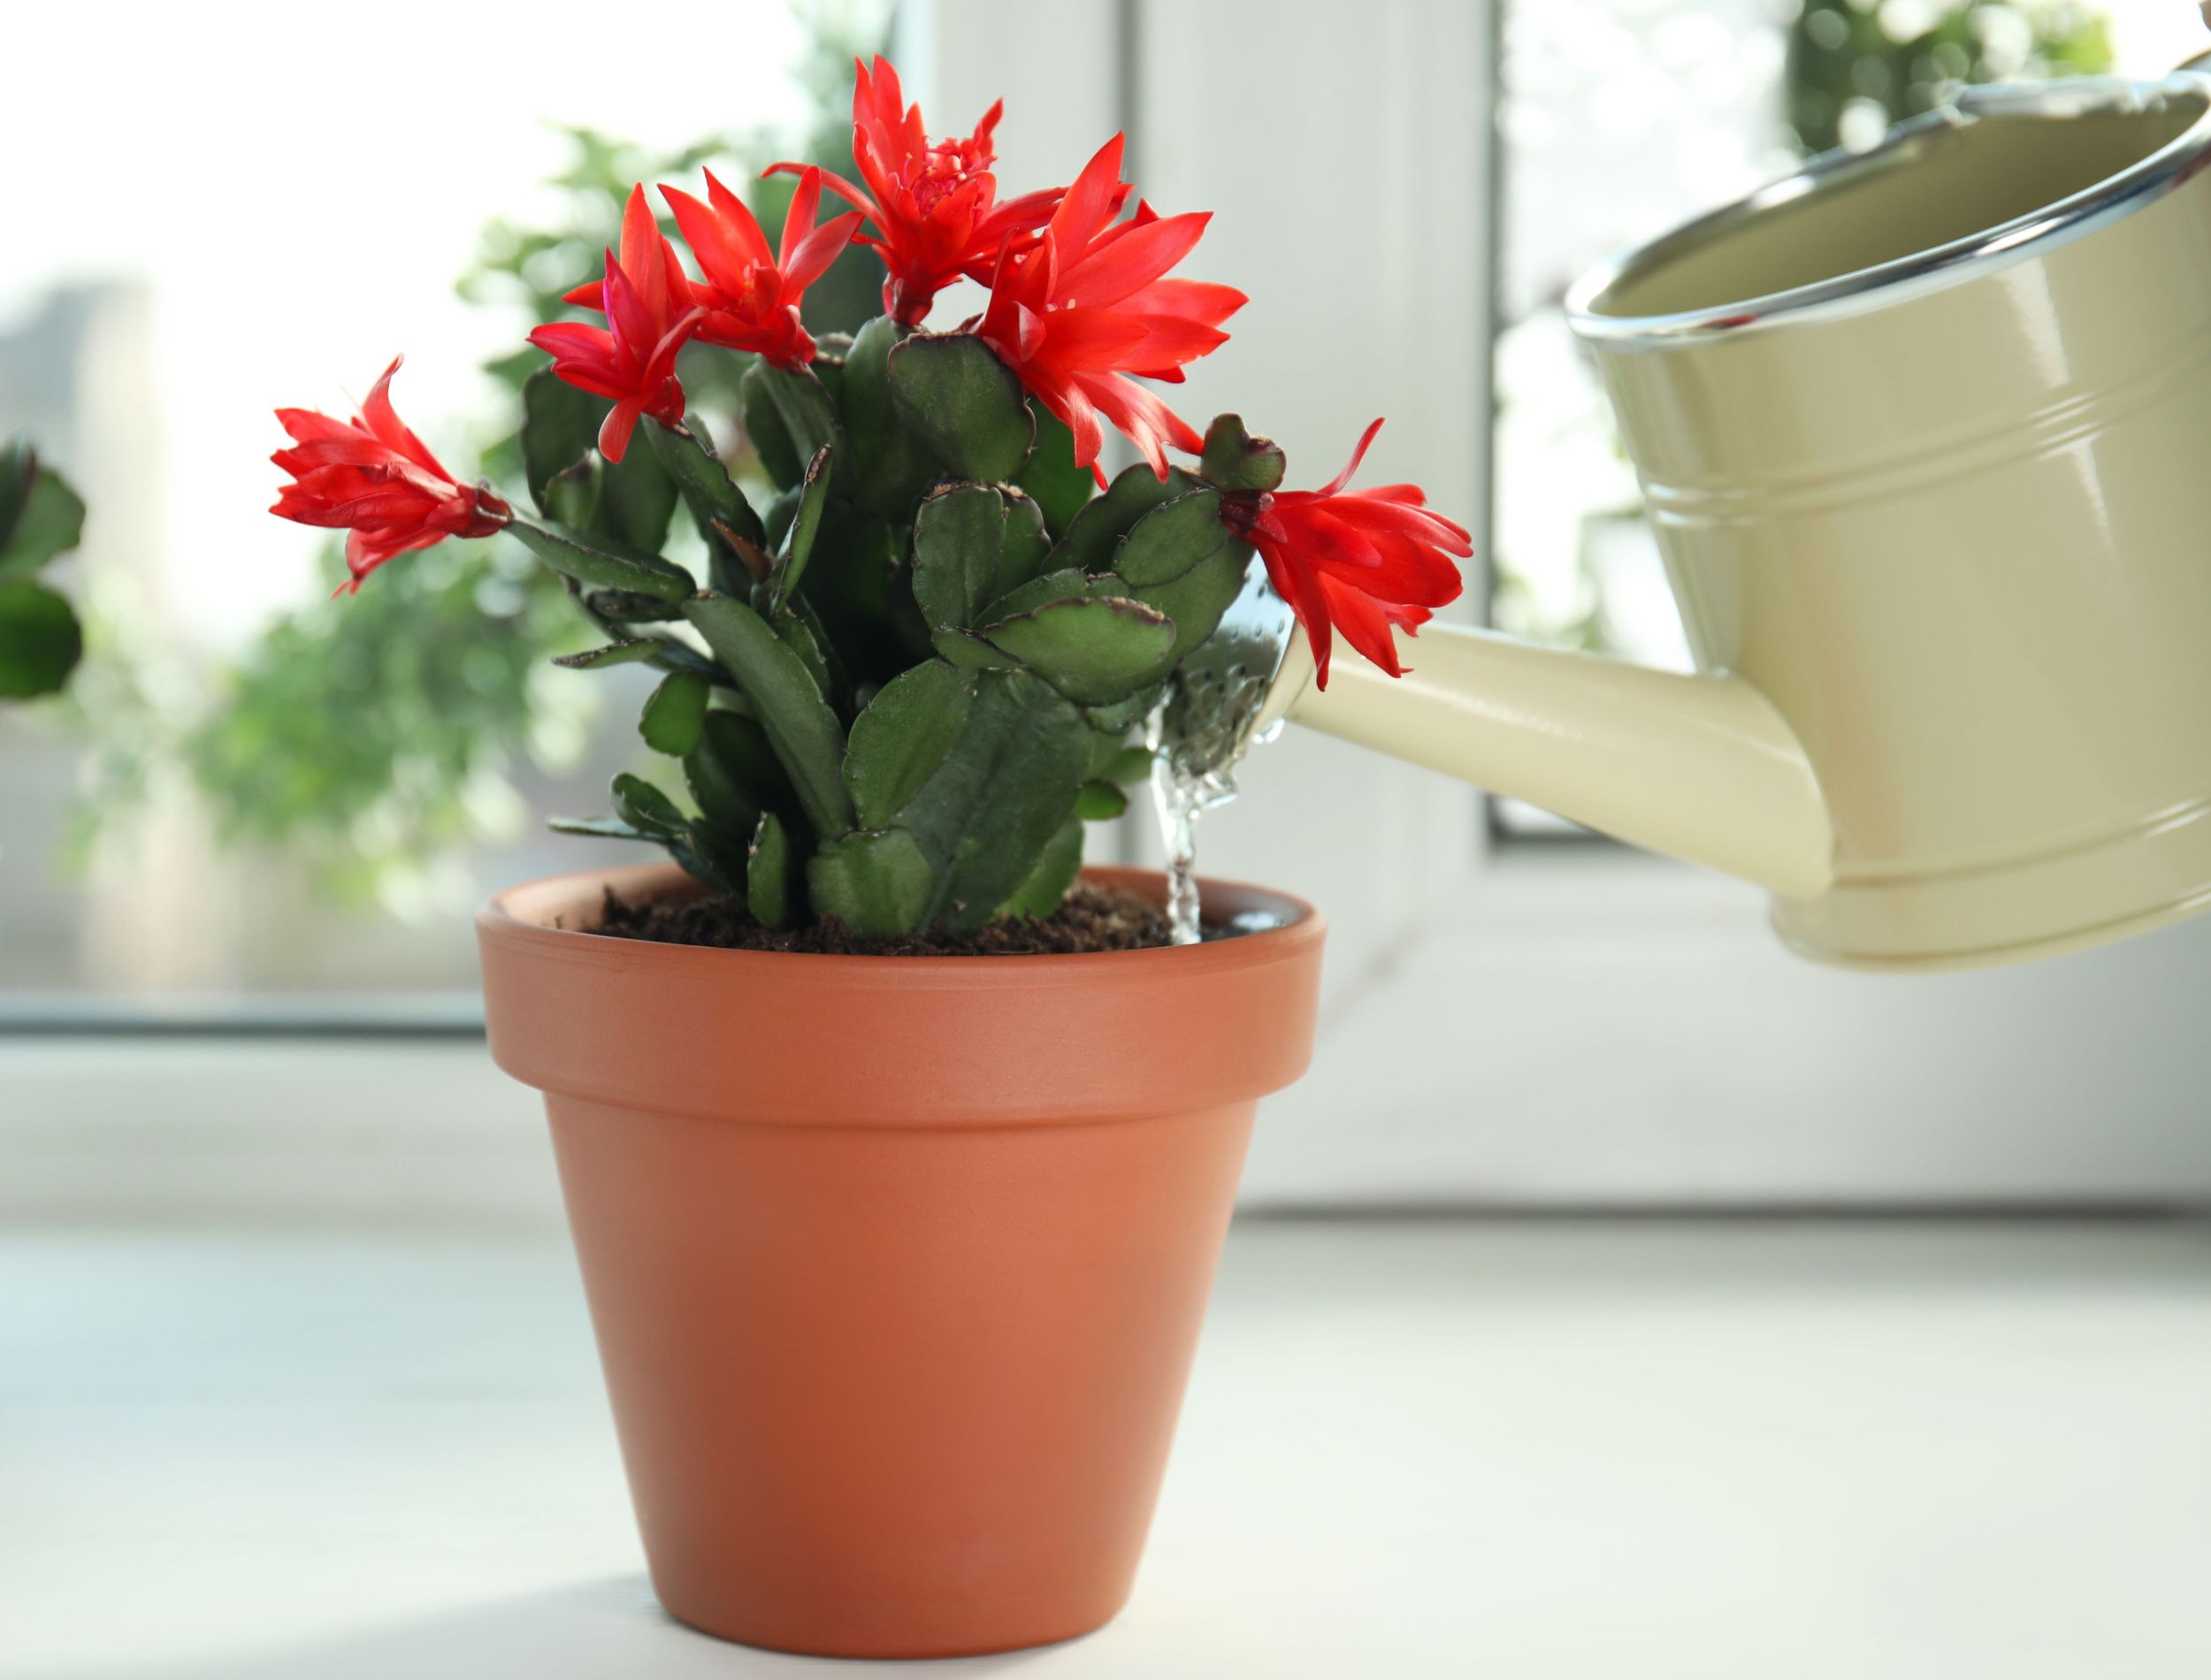 Watering beautiful blooming Schlumbergera plant (Christmas cactus) in pot on window sill